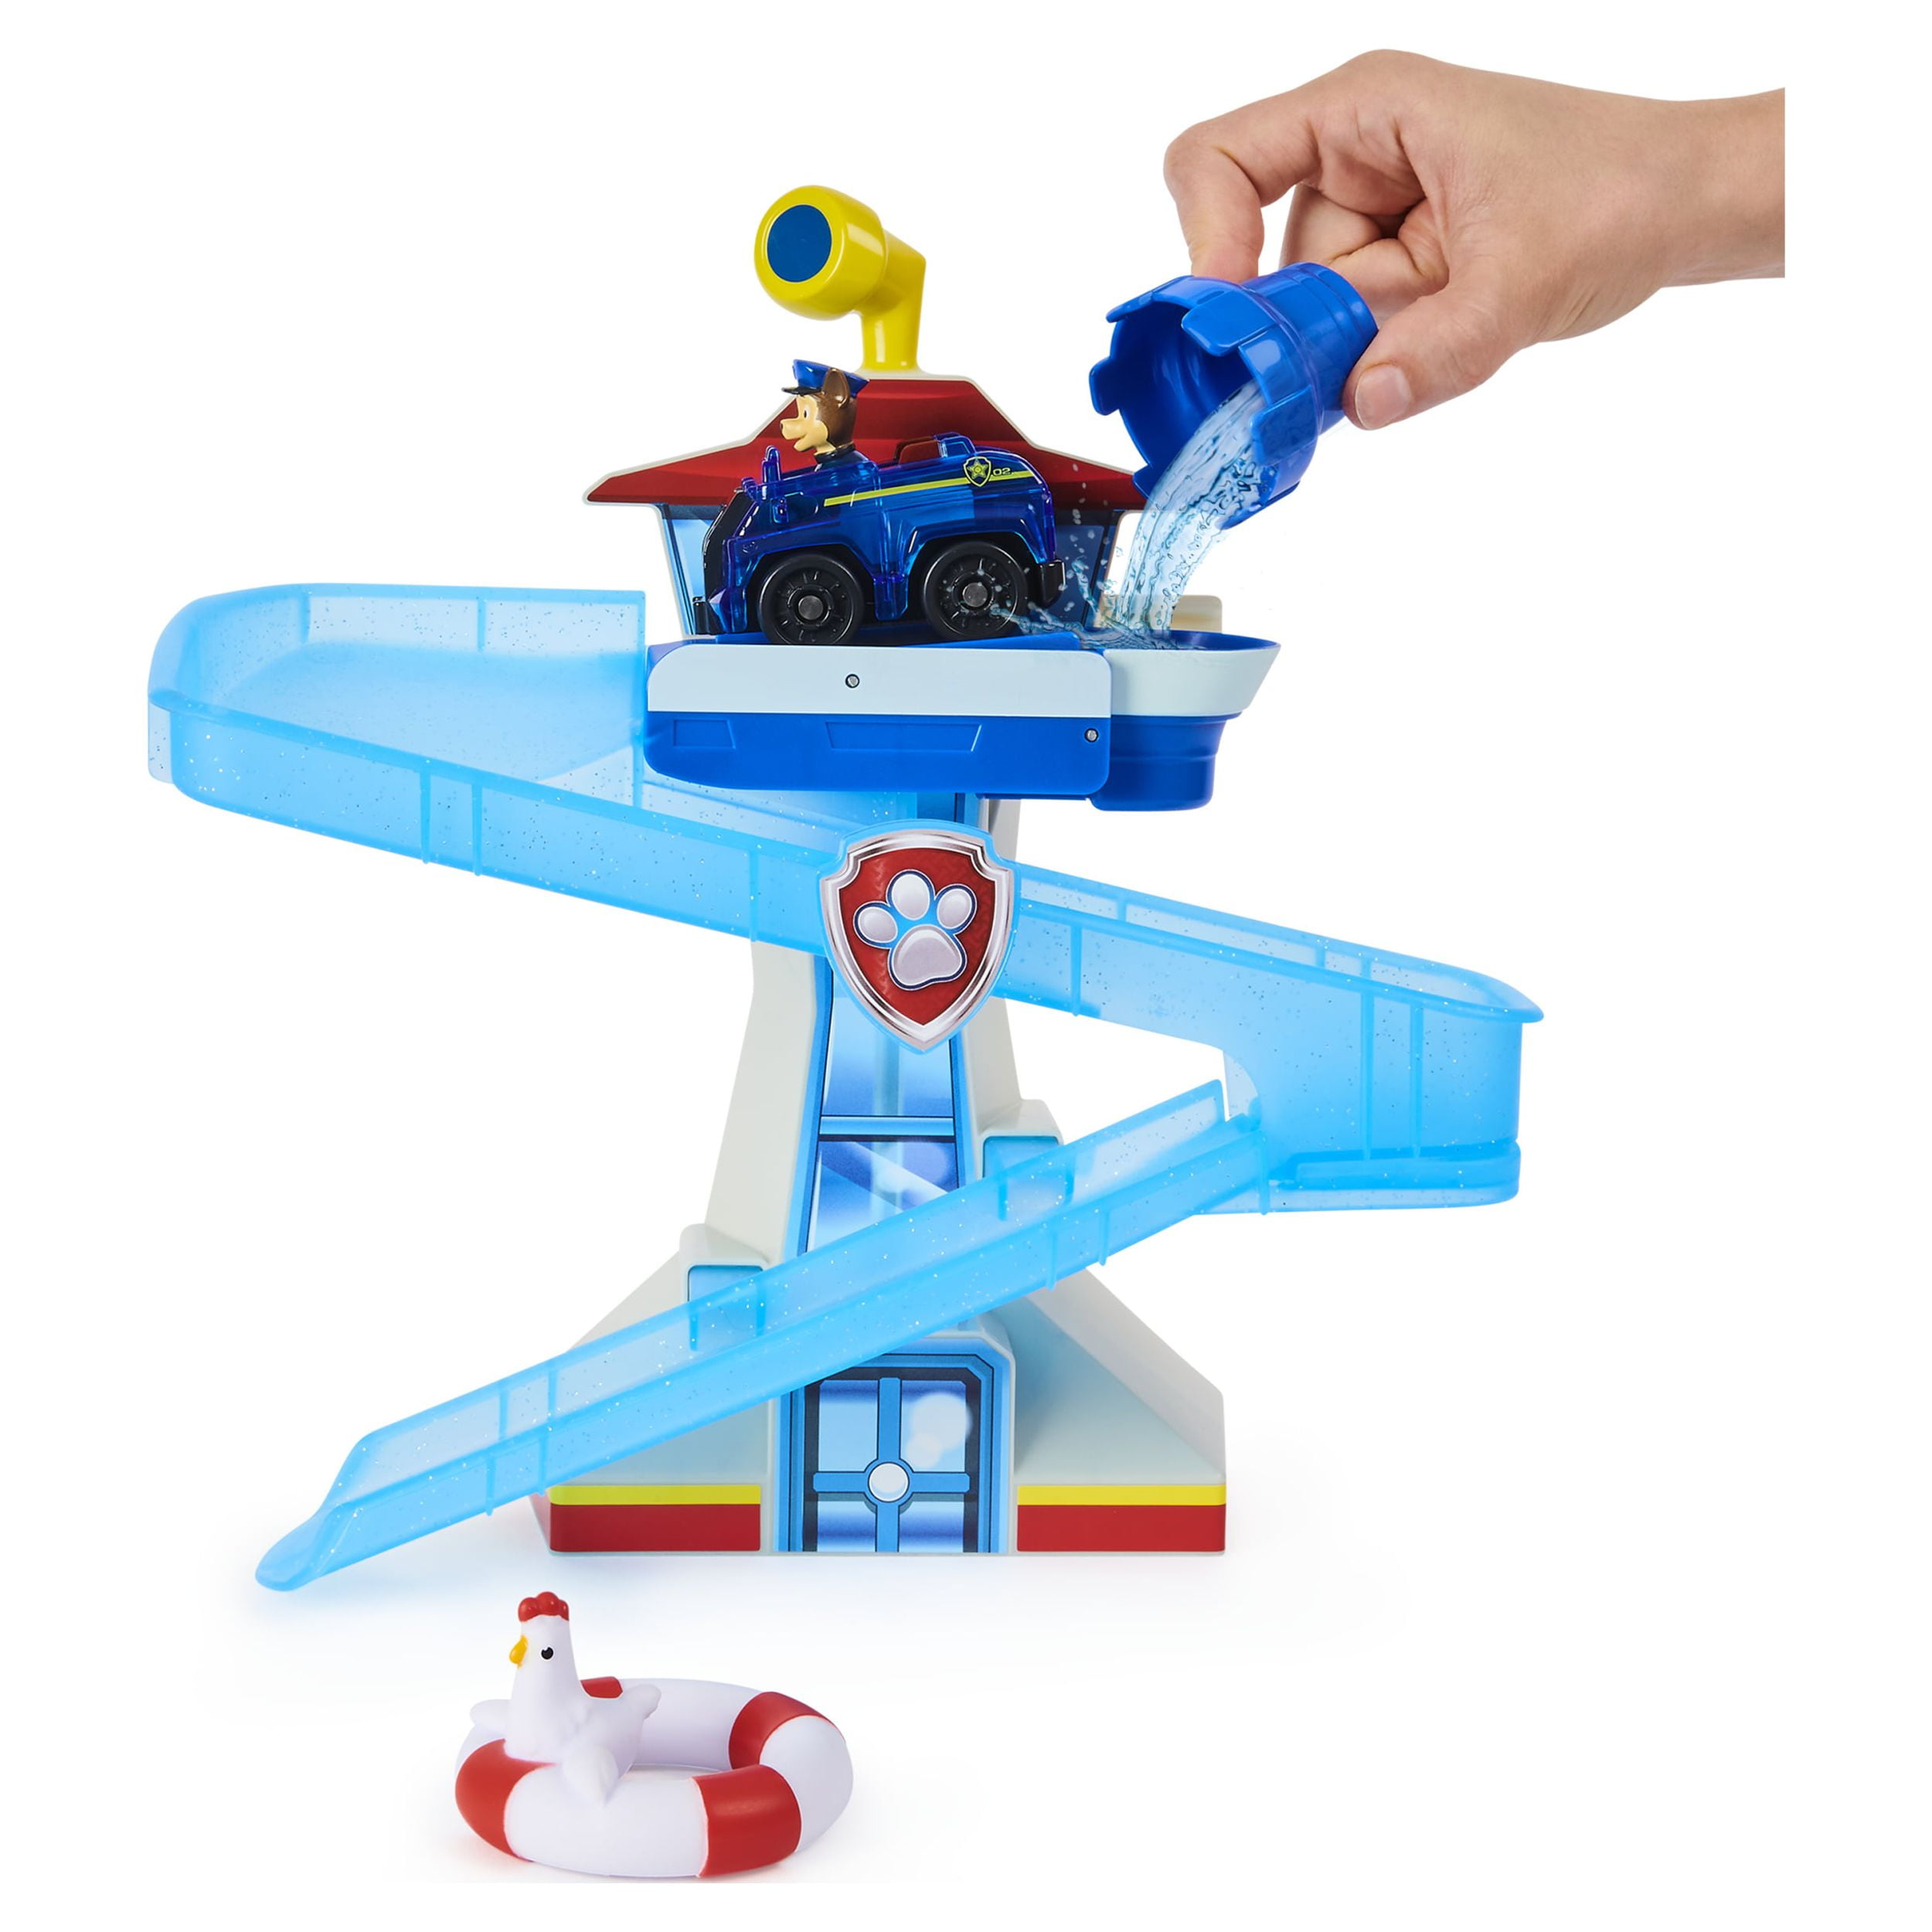 Paw Patrol, Adventure Bay Bath Toy with Chase for 3 Kids Playset Bath Vehicle, and Aged Light-up up